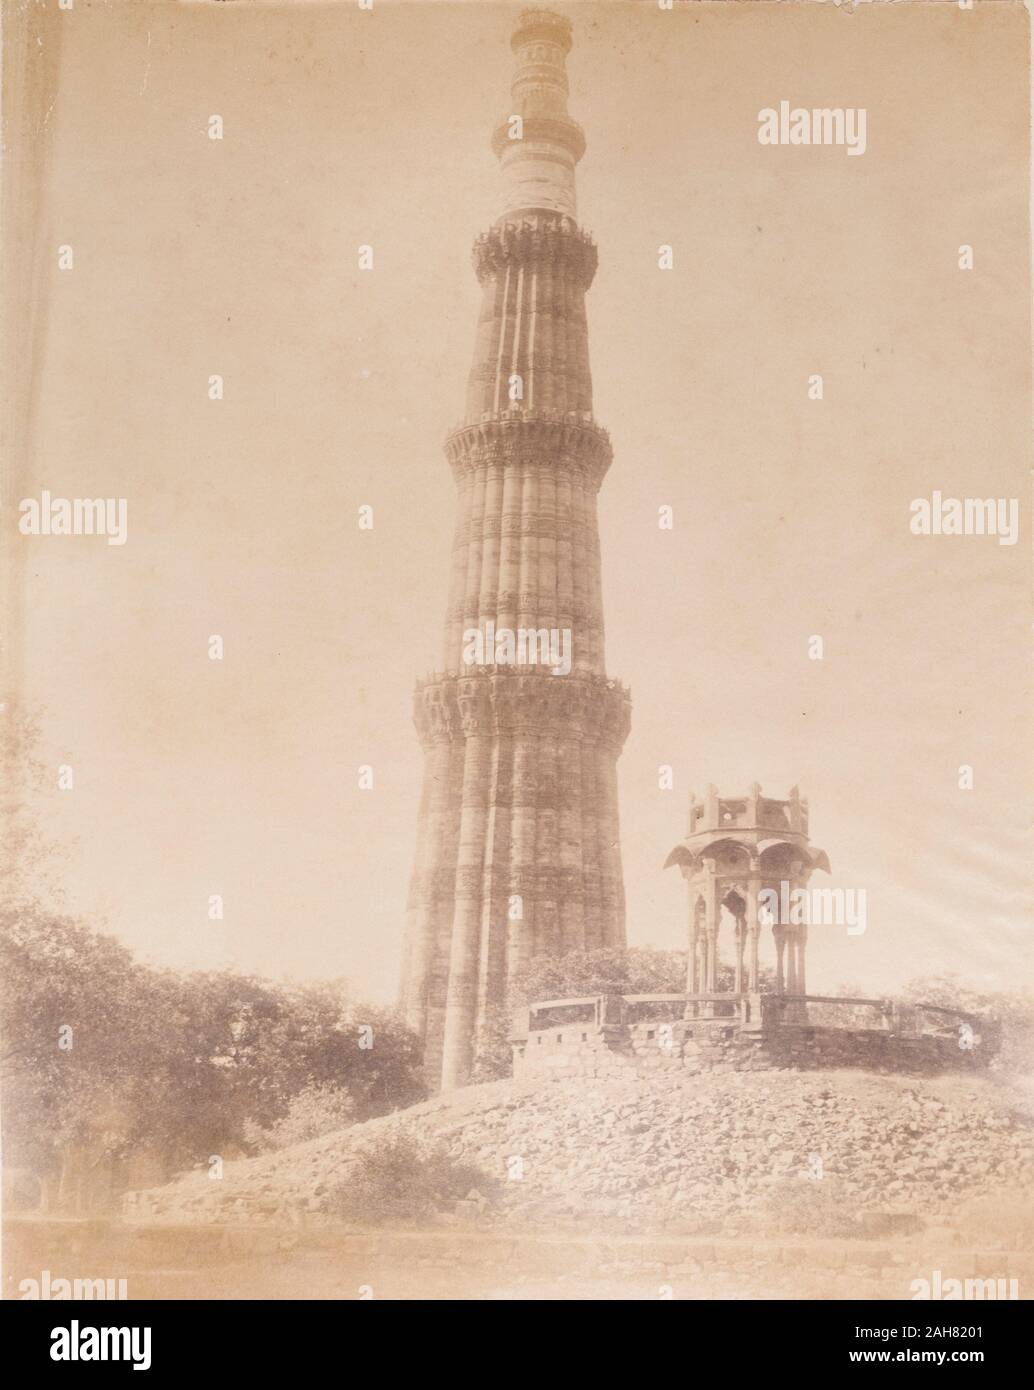 India, View of the Qutb Minar, one of the greatest monuments of Islamic architecture in India. At 72.5 metres tall, the celebratory victory tower was built to accompany the Quwwat-ul-Islam mosque, and was probably inspired by the style of Afghan minarets. Original manuscript caption: The Kutub near Delhi, circa 1890. 2003/071/1/1/2/55. Stock Photo